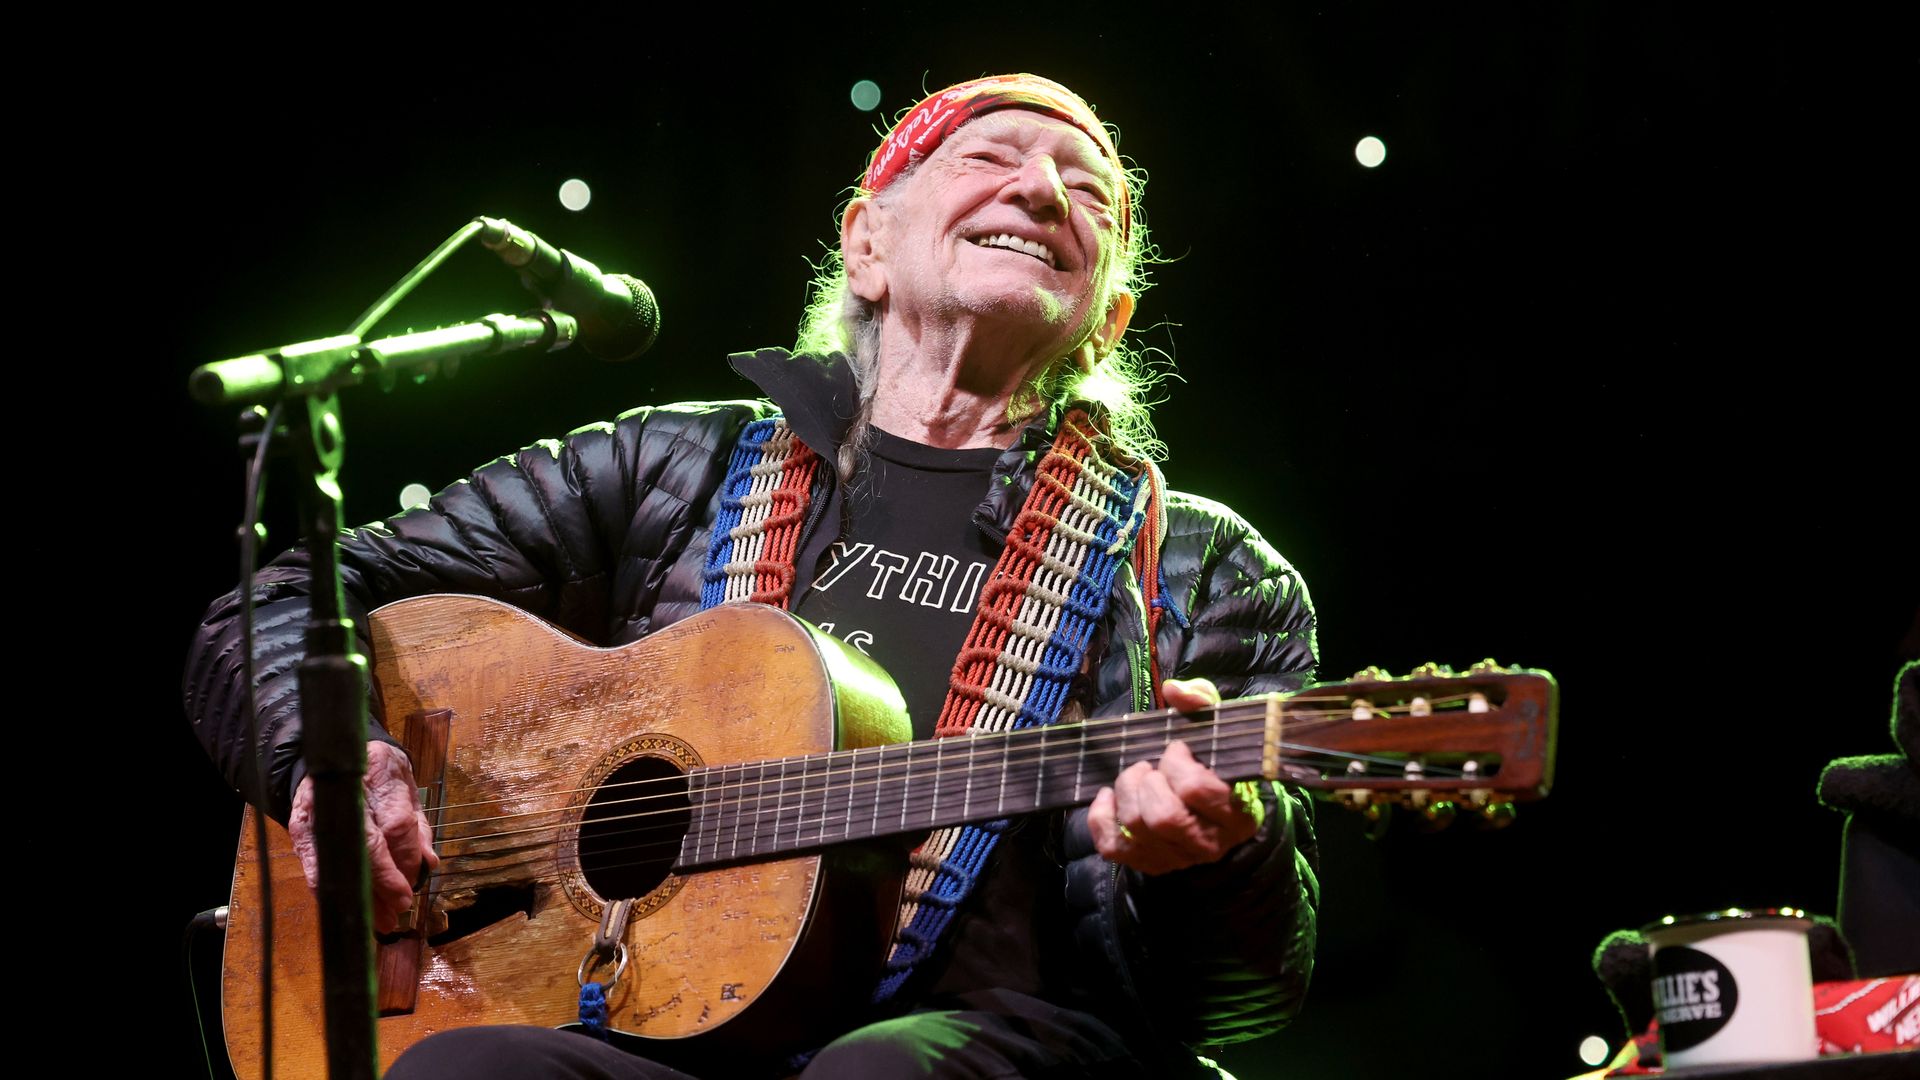 Willie Nelson smiles and sits while playing an acoustic guitar in a darkened music venue